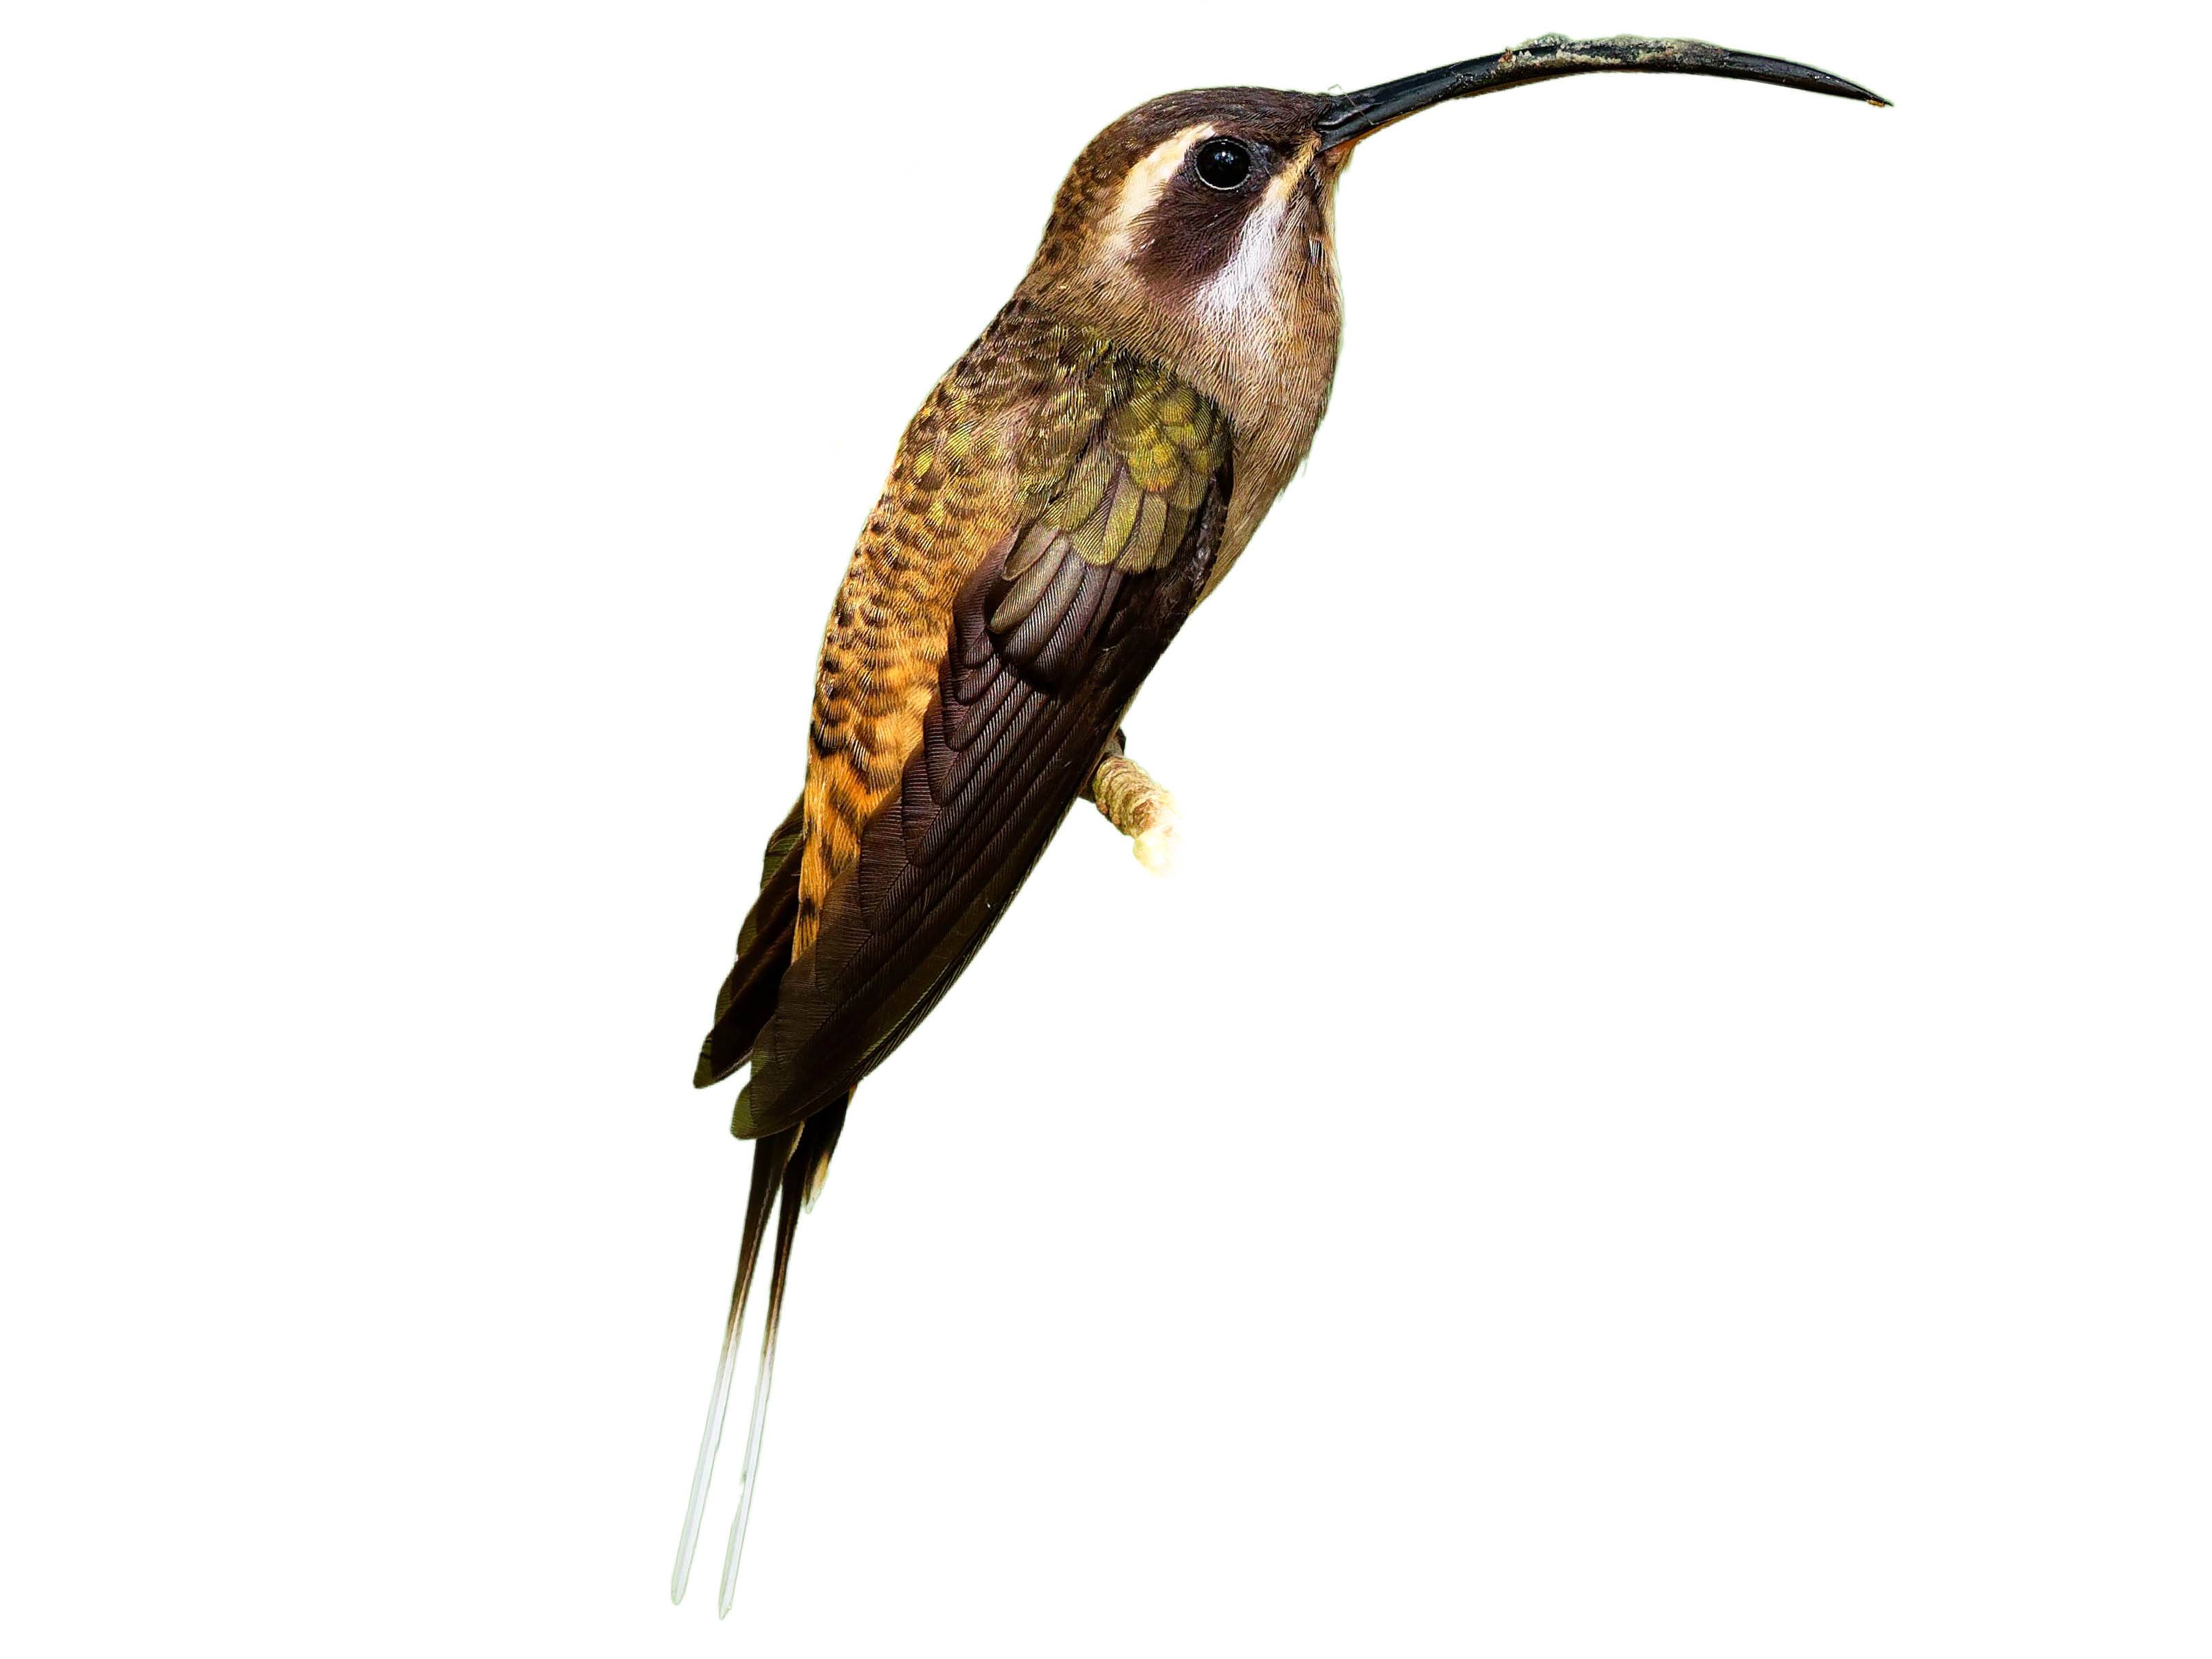 A photo of a Long-billed Hermit (Phaethornis longirostris)